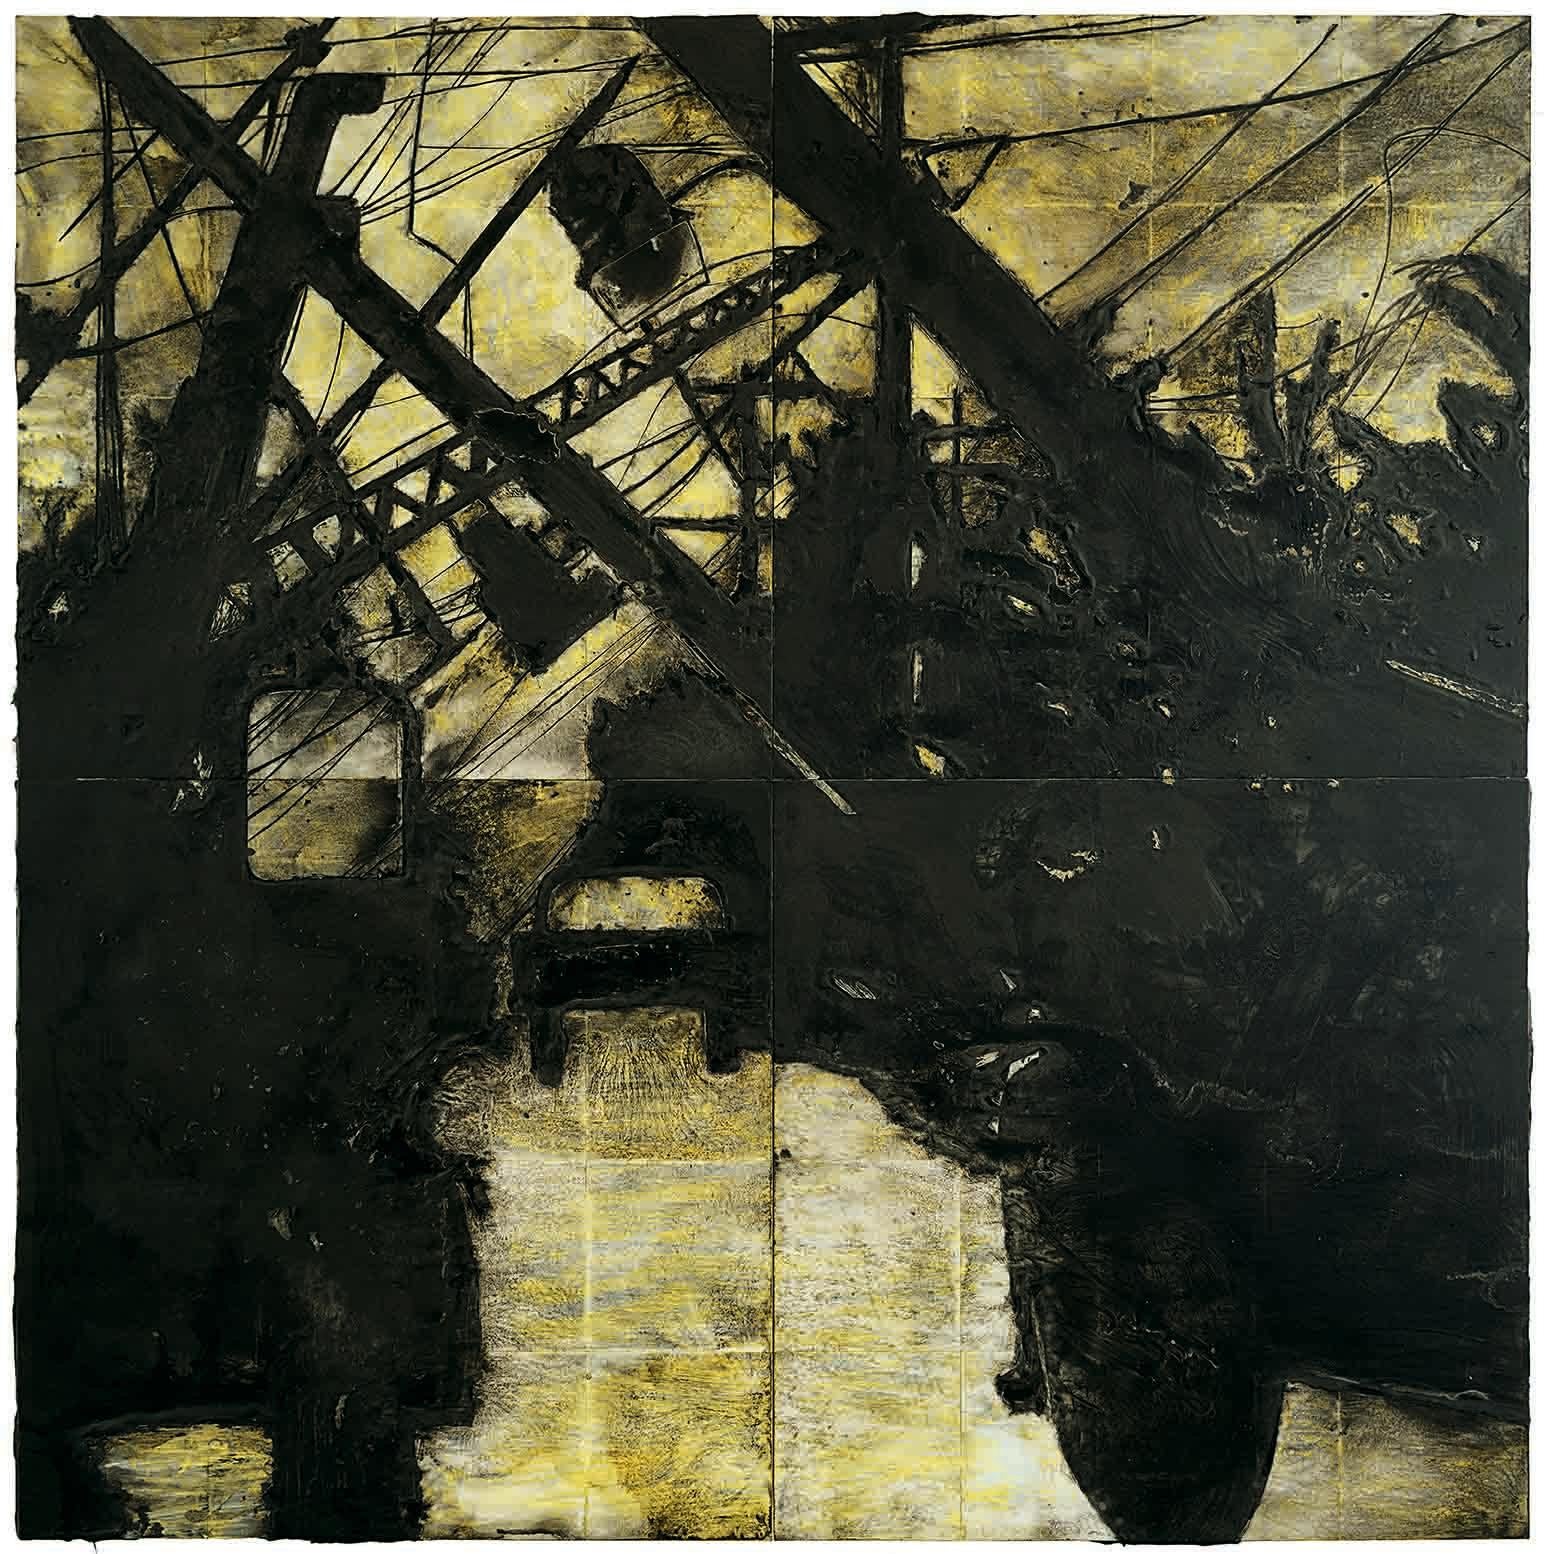 Donald Sultan
Born 1951  
Lines Down, 11 November 1985
Latex and tar on tile
96 x 96 inches

Donald Sultan is an acclaimed American painter known for his large-scale paintings produced using a range of industrial and non-art materials, including